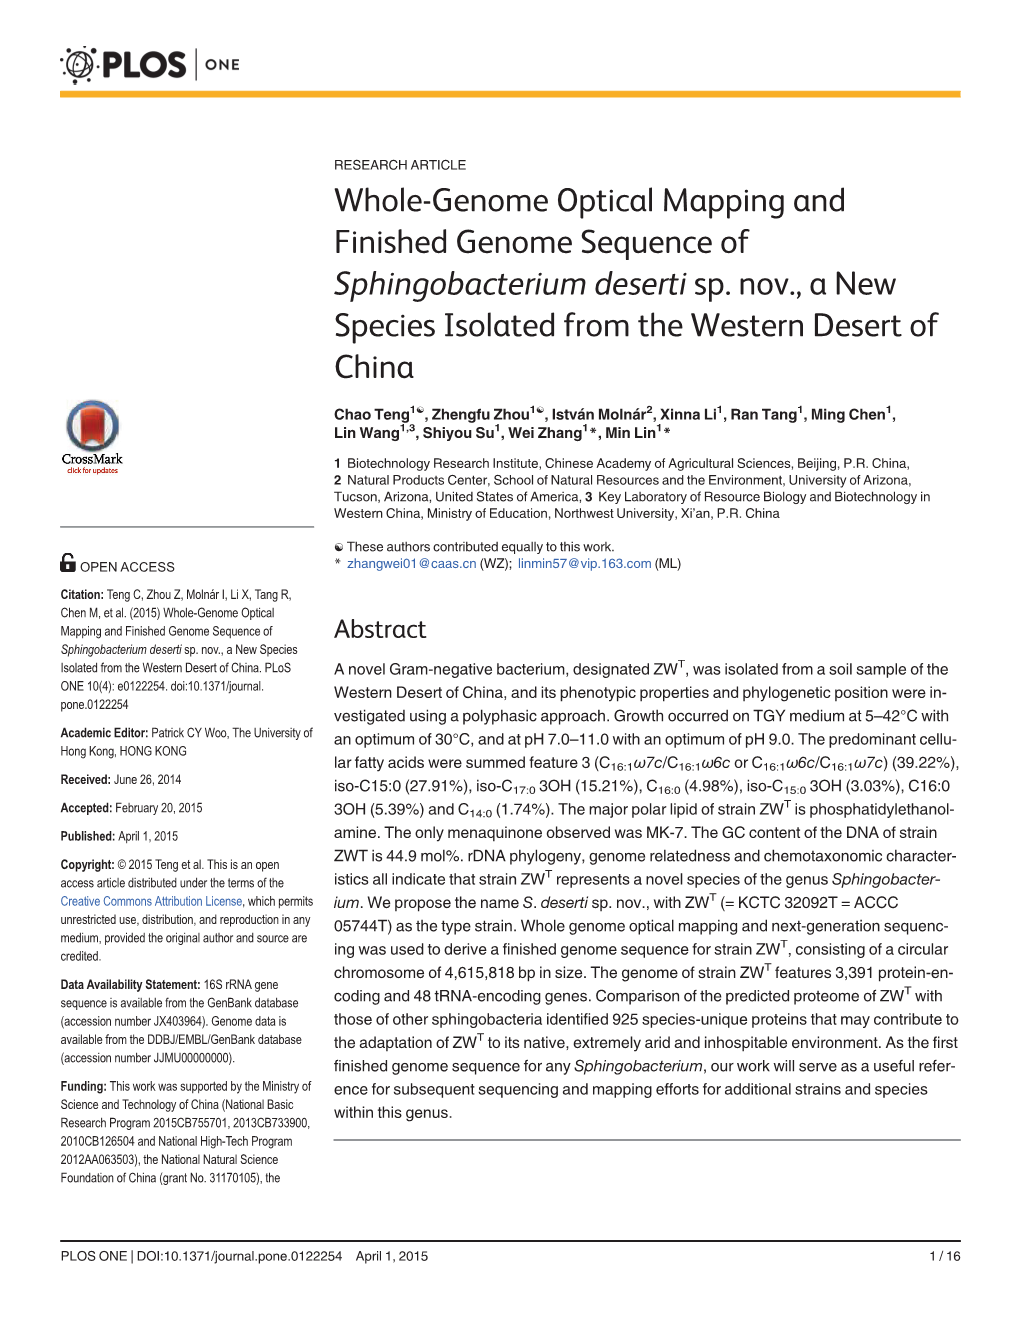 Whole-Genome Optical Mapping and Finished Genome Sequence of Sphingobacterium Deserti Sp